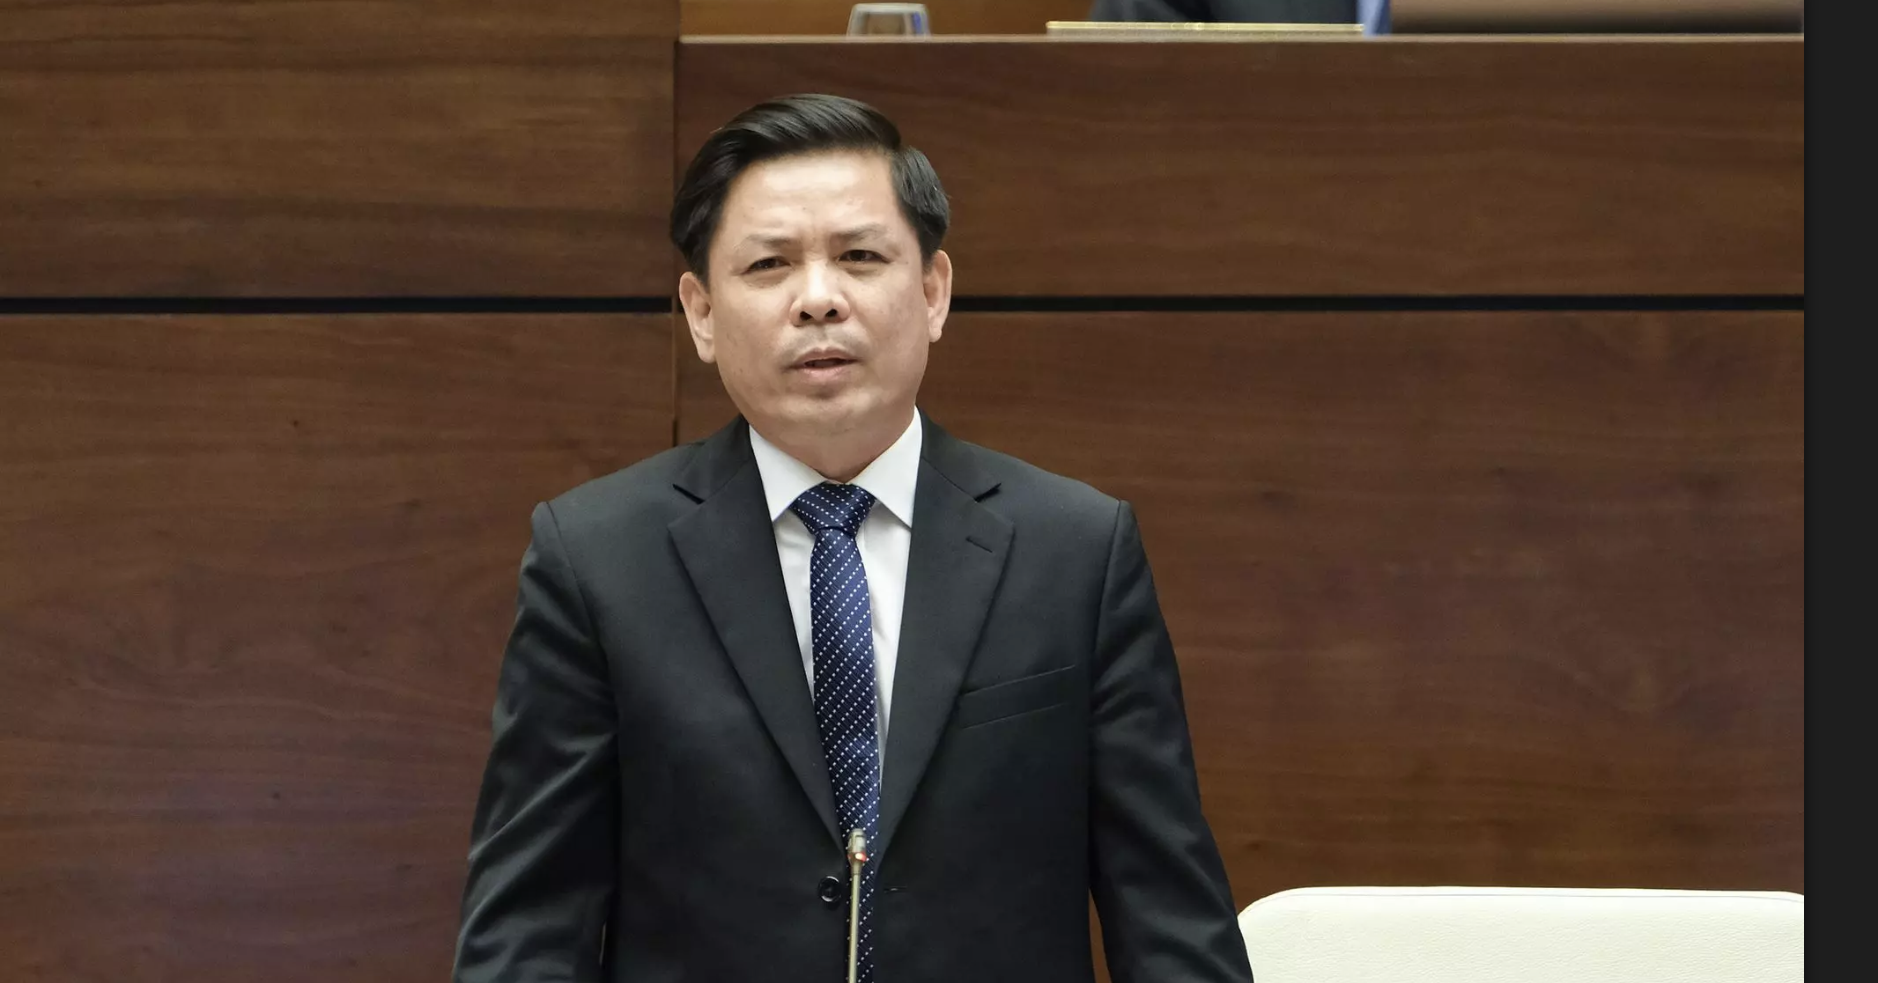 Minister Nguyen Van The said “not yet detected”